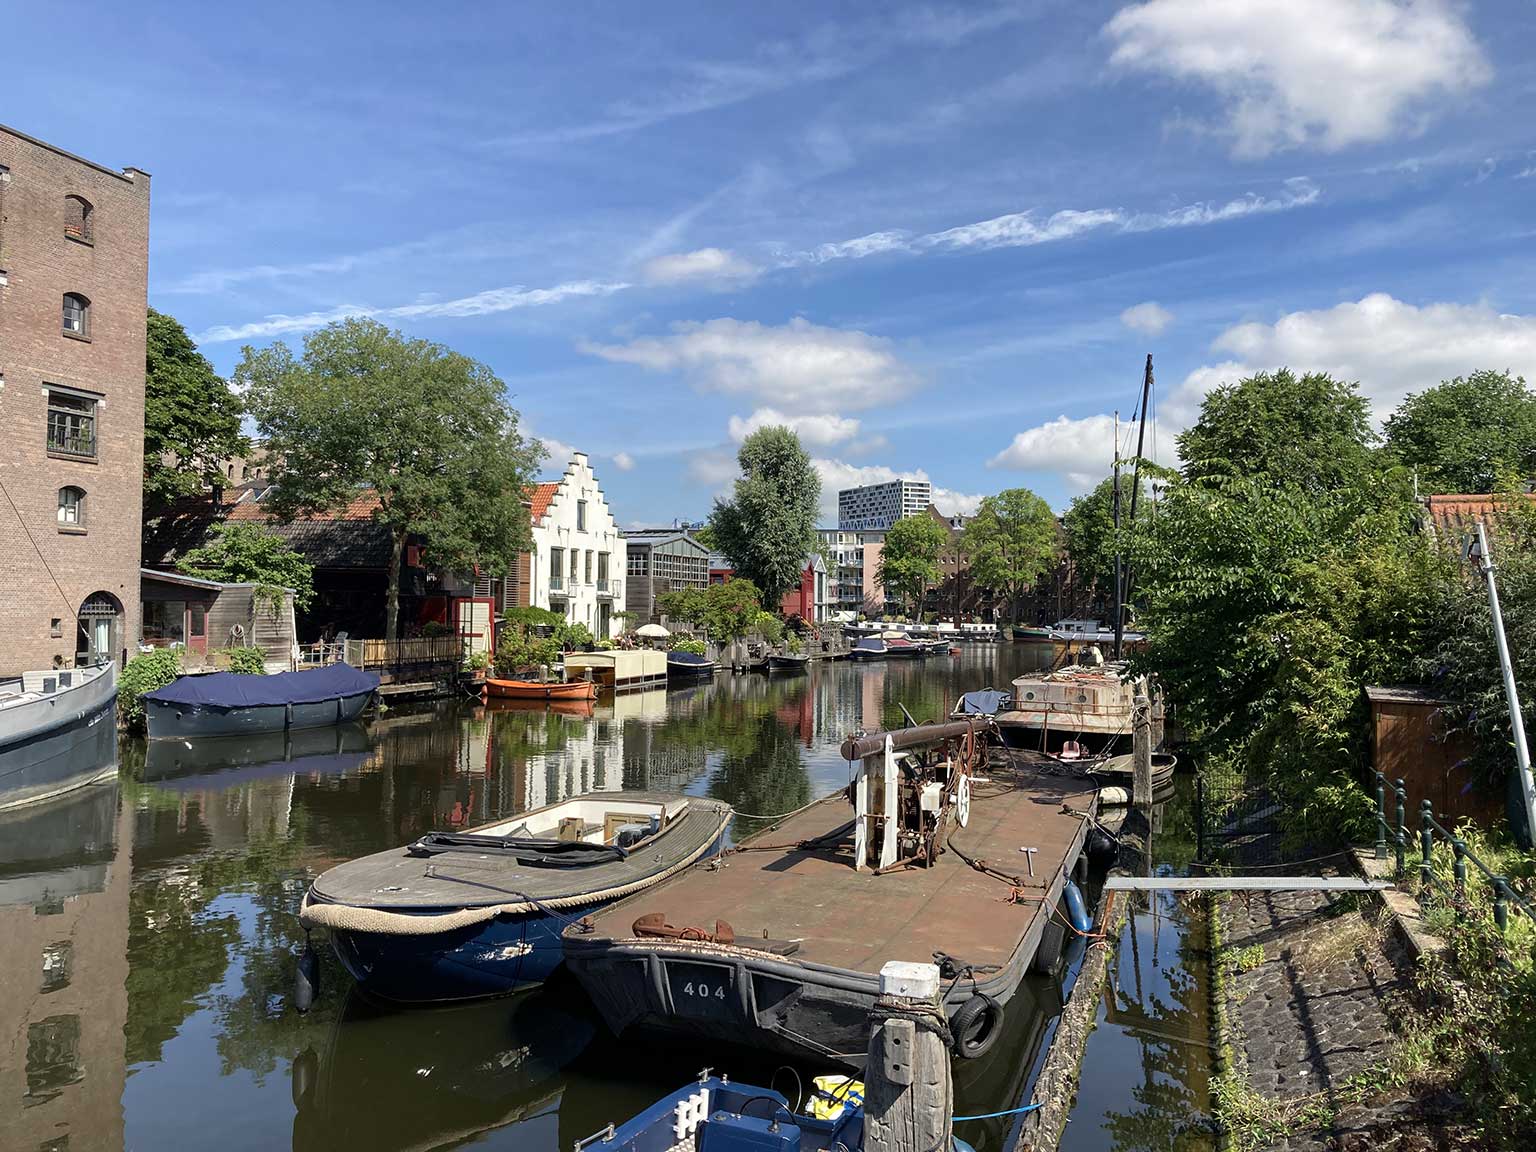 View north along Bickersgracht, Amsterdam, from Galgenbrug